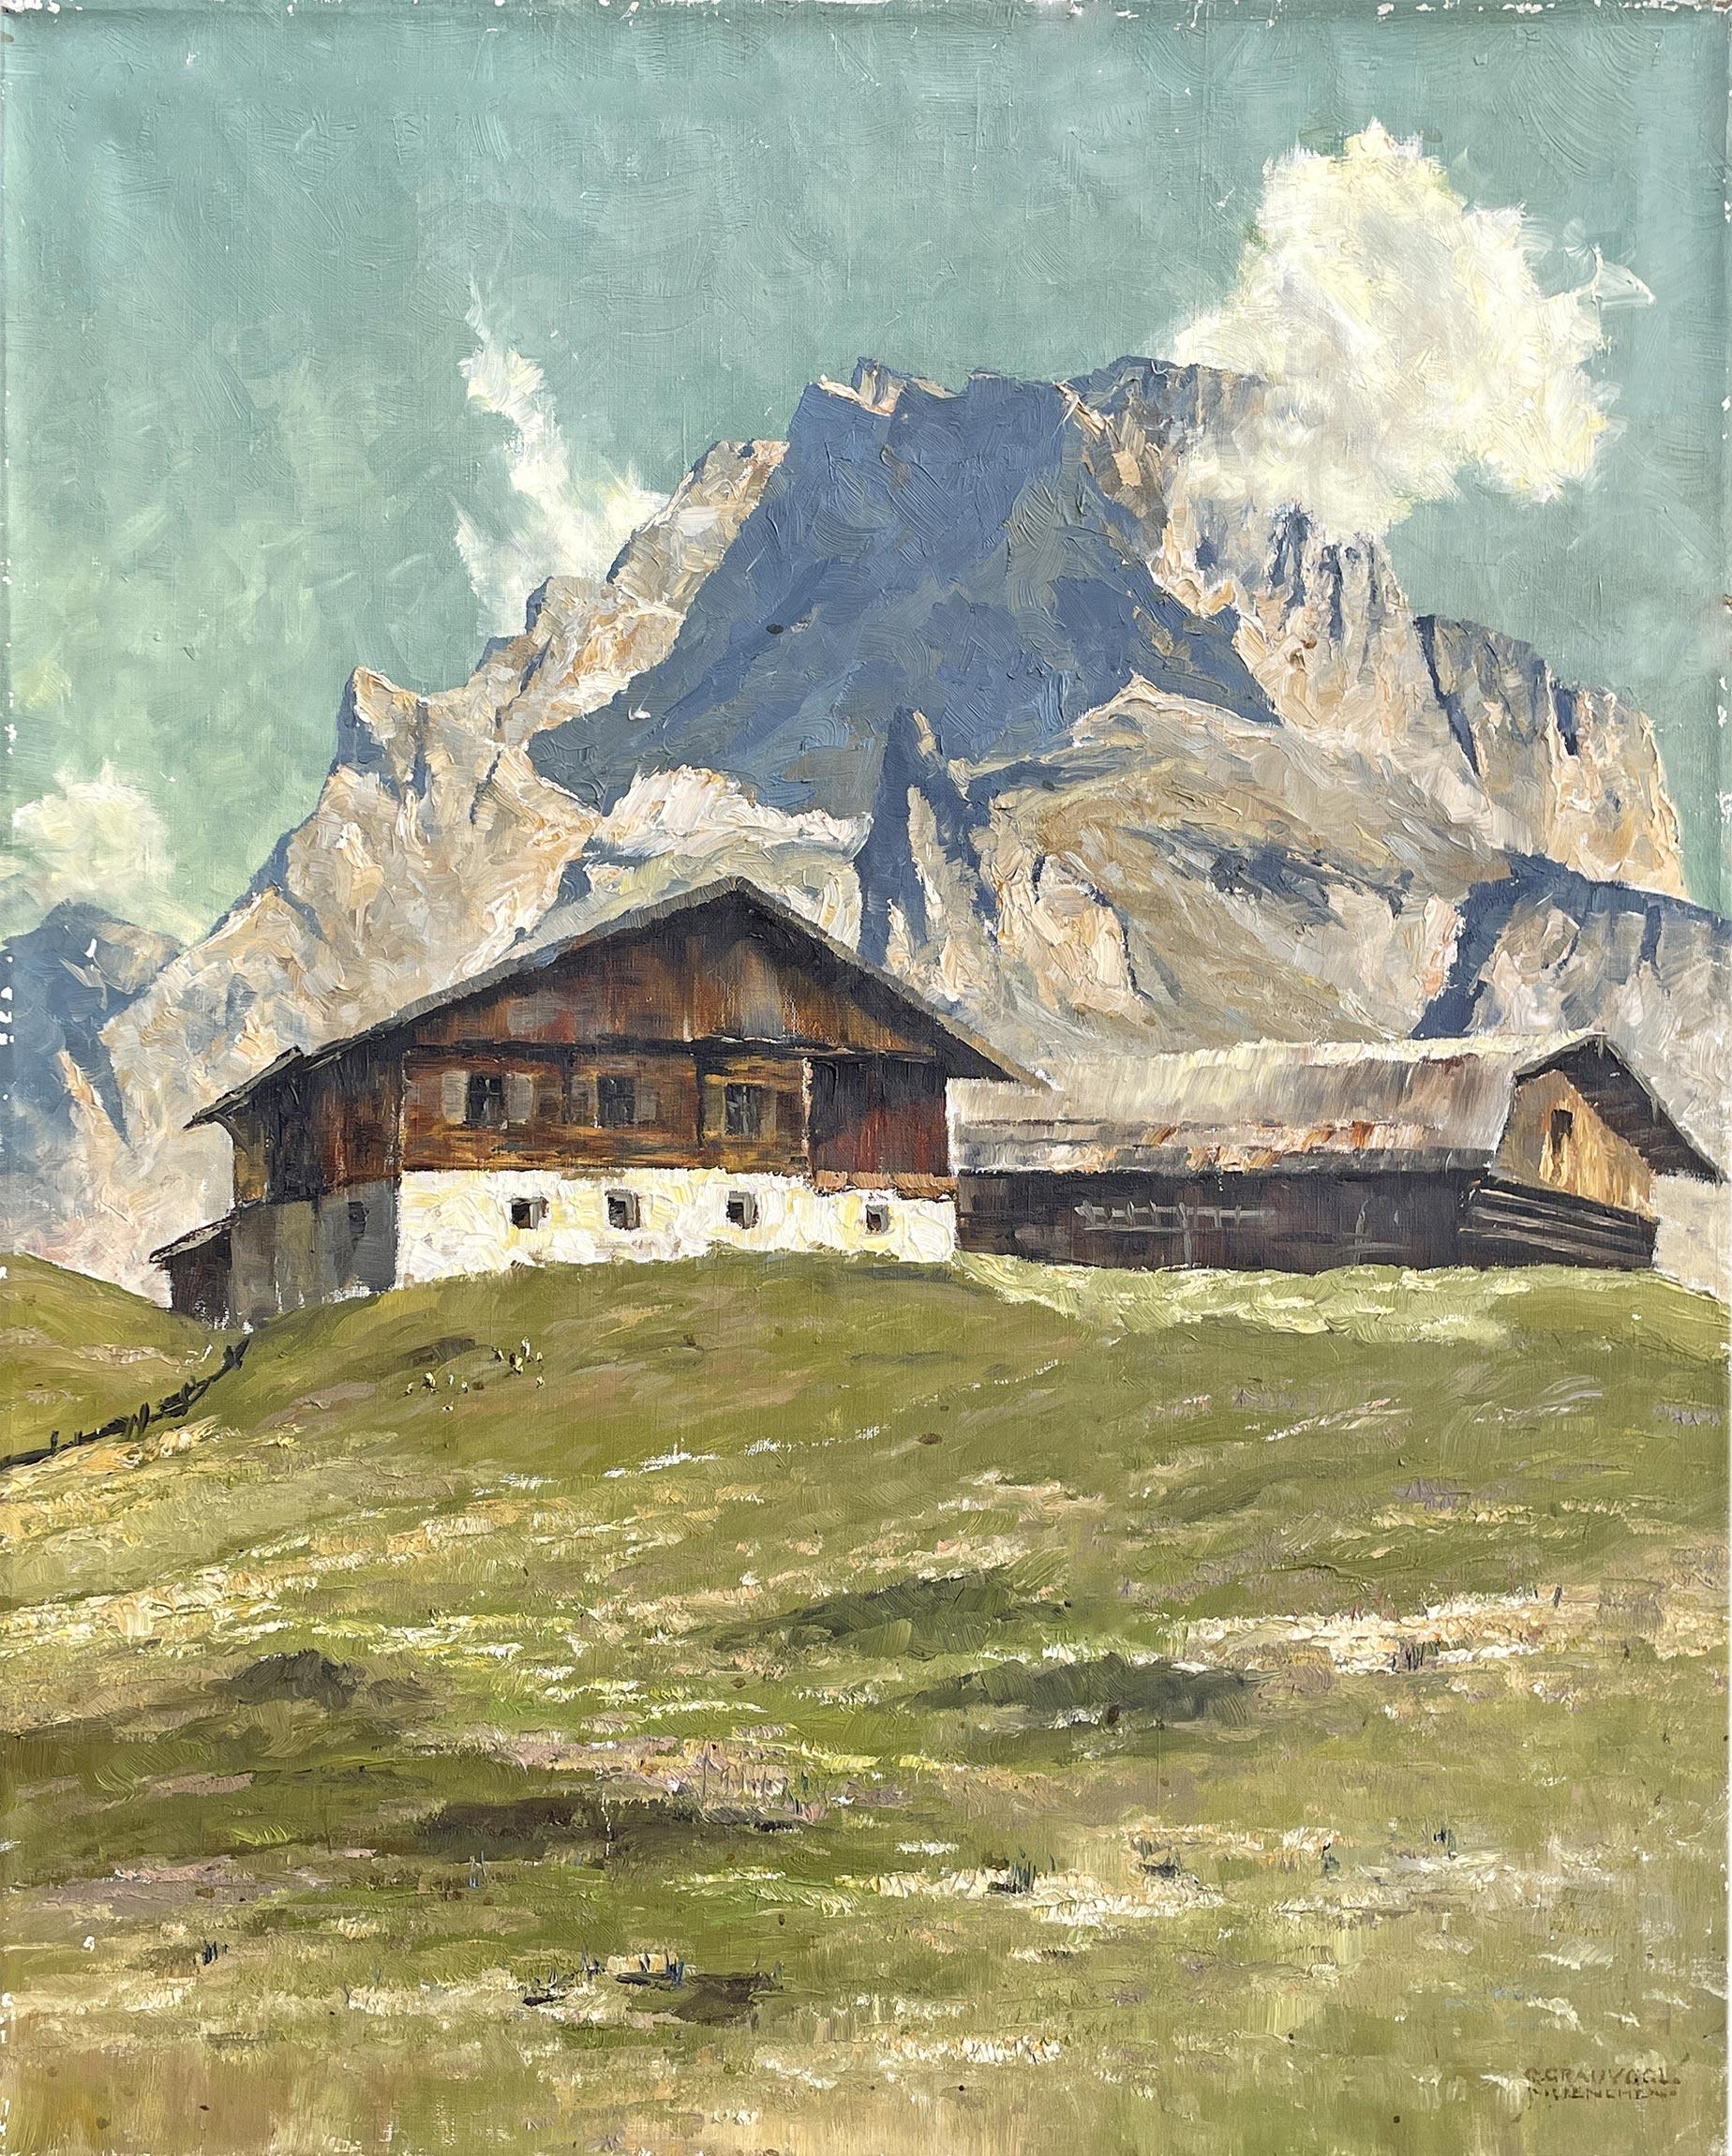 View of Gardena Pass Italian Dolomites Oil on Canvas by Georg Grauvogl  11